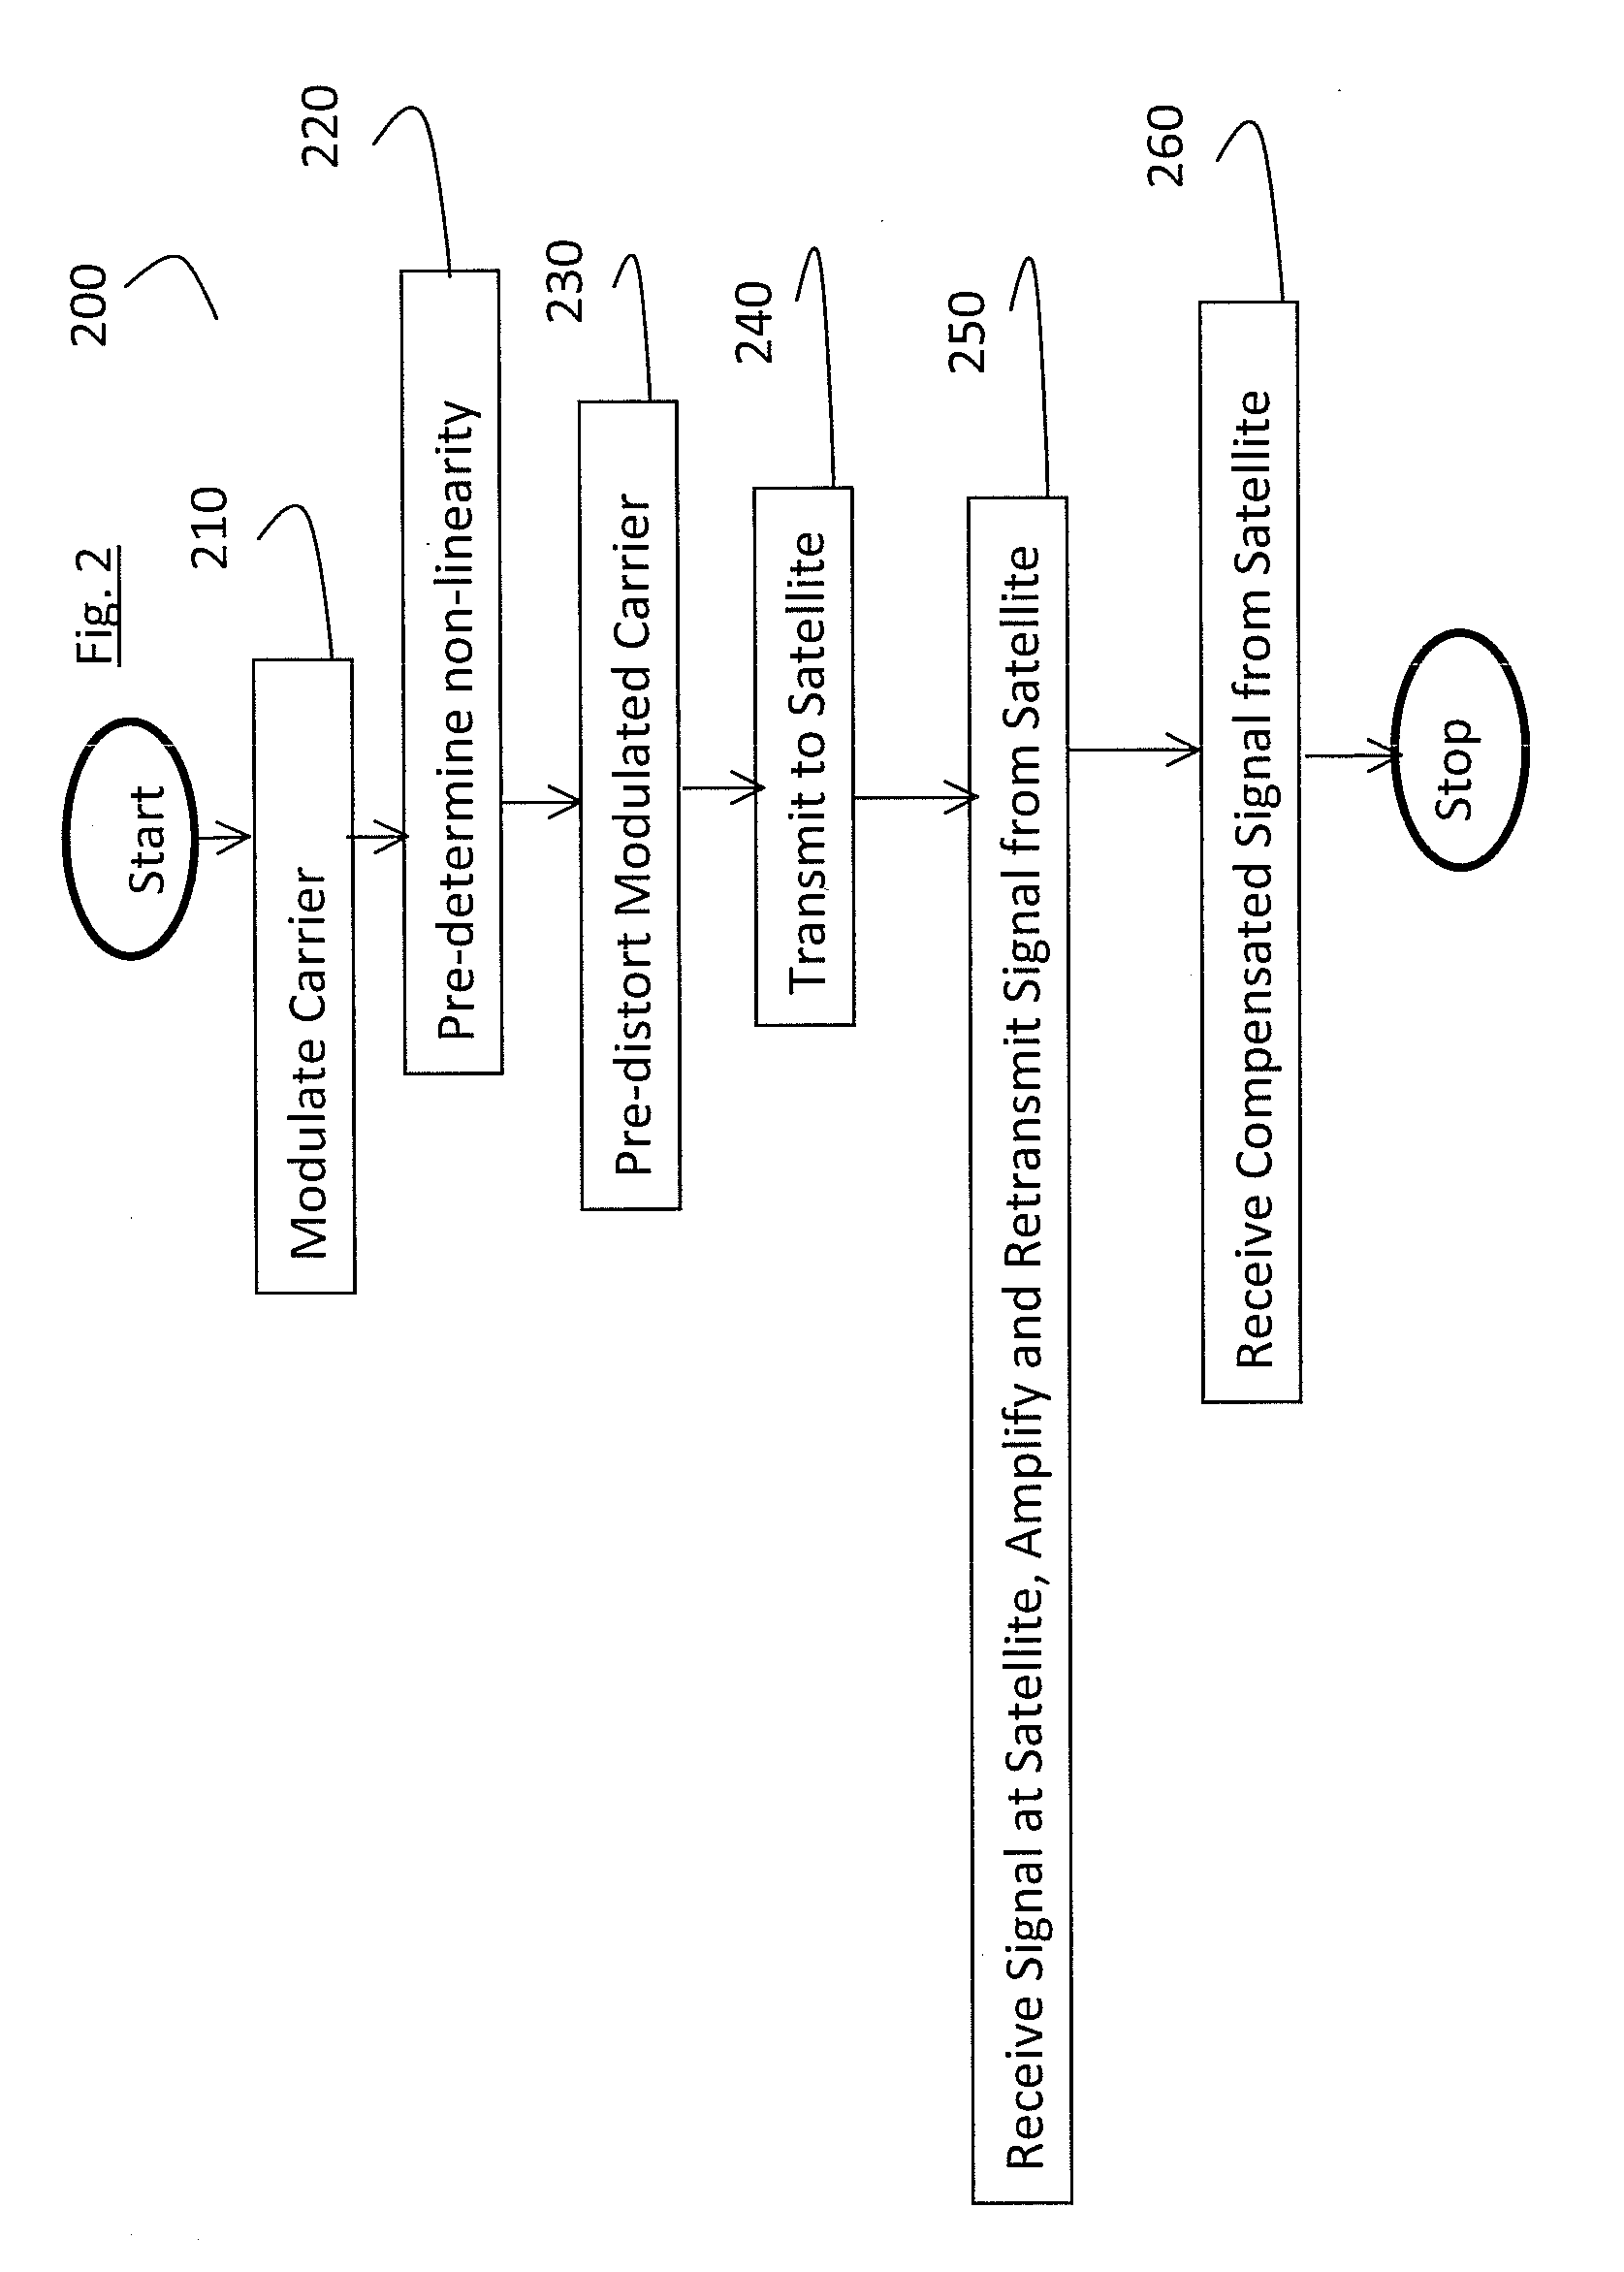 Method of transmitting higher power from a satellite by more efficiently using the existing satellite power amplifiers